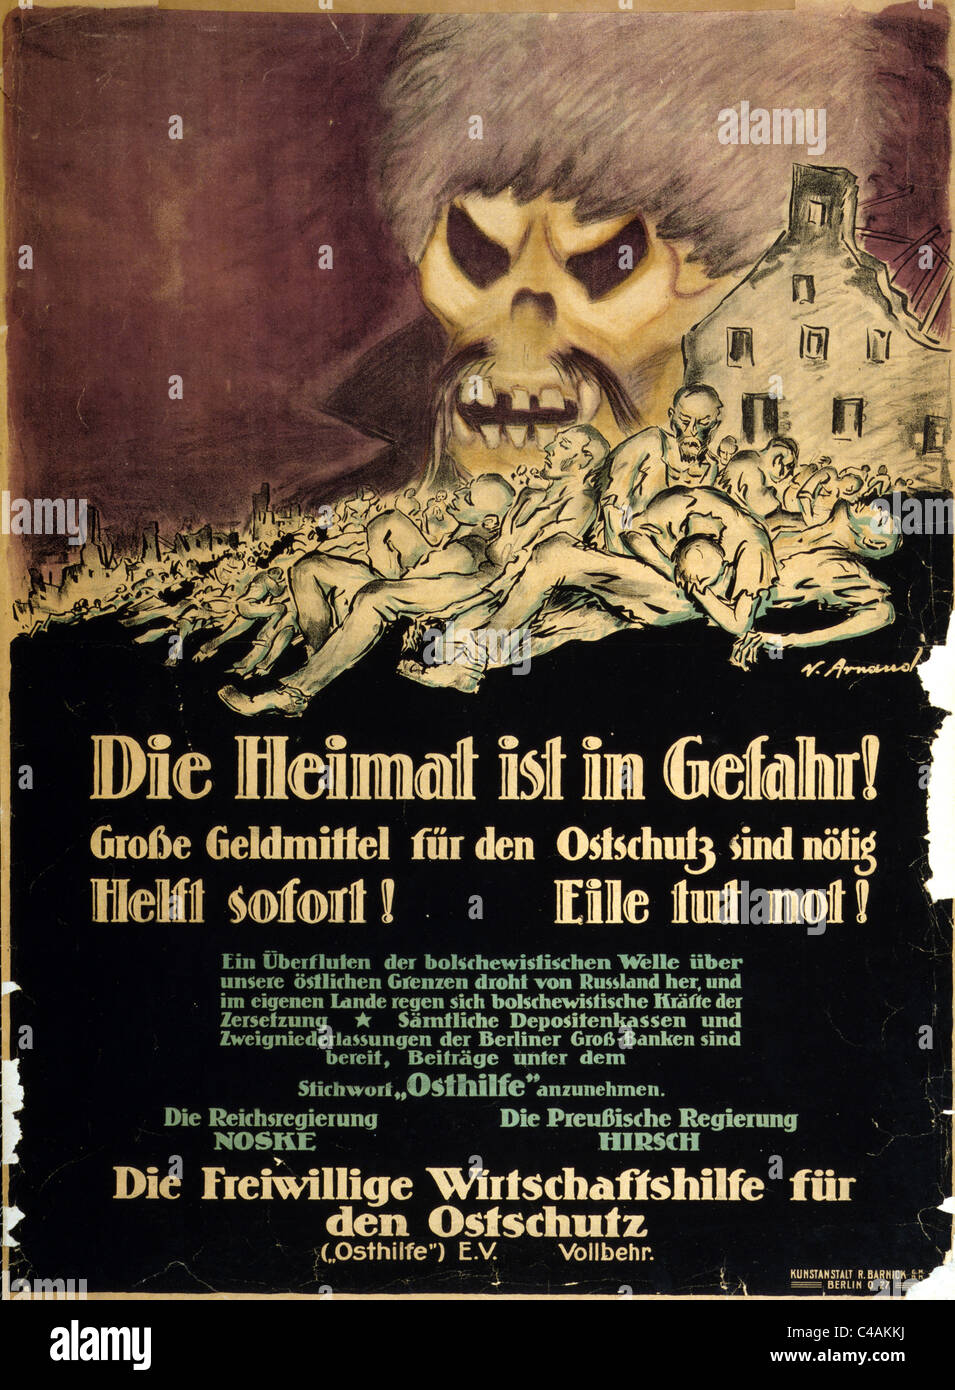 Die Heimat ist in Gefahr! 'The home is in danger' German poster against Bolshevism advancing from Russia Stock Photo